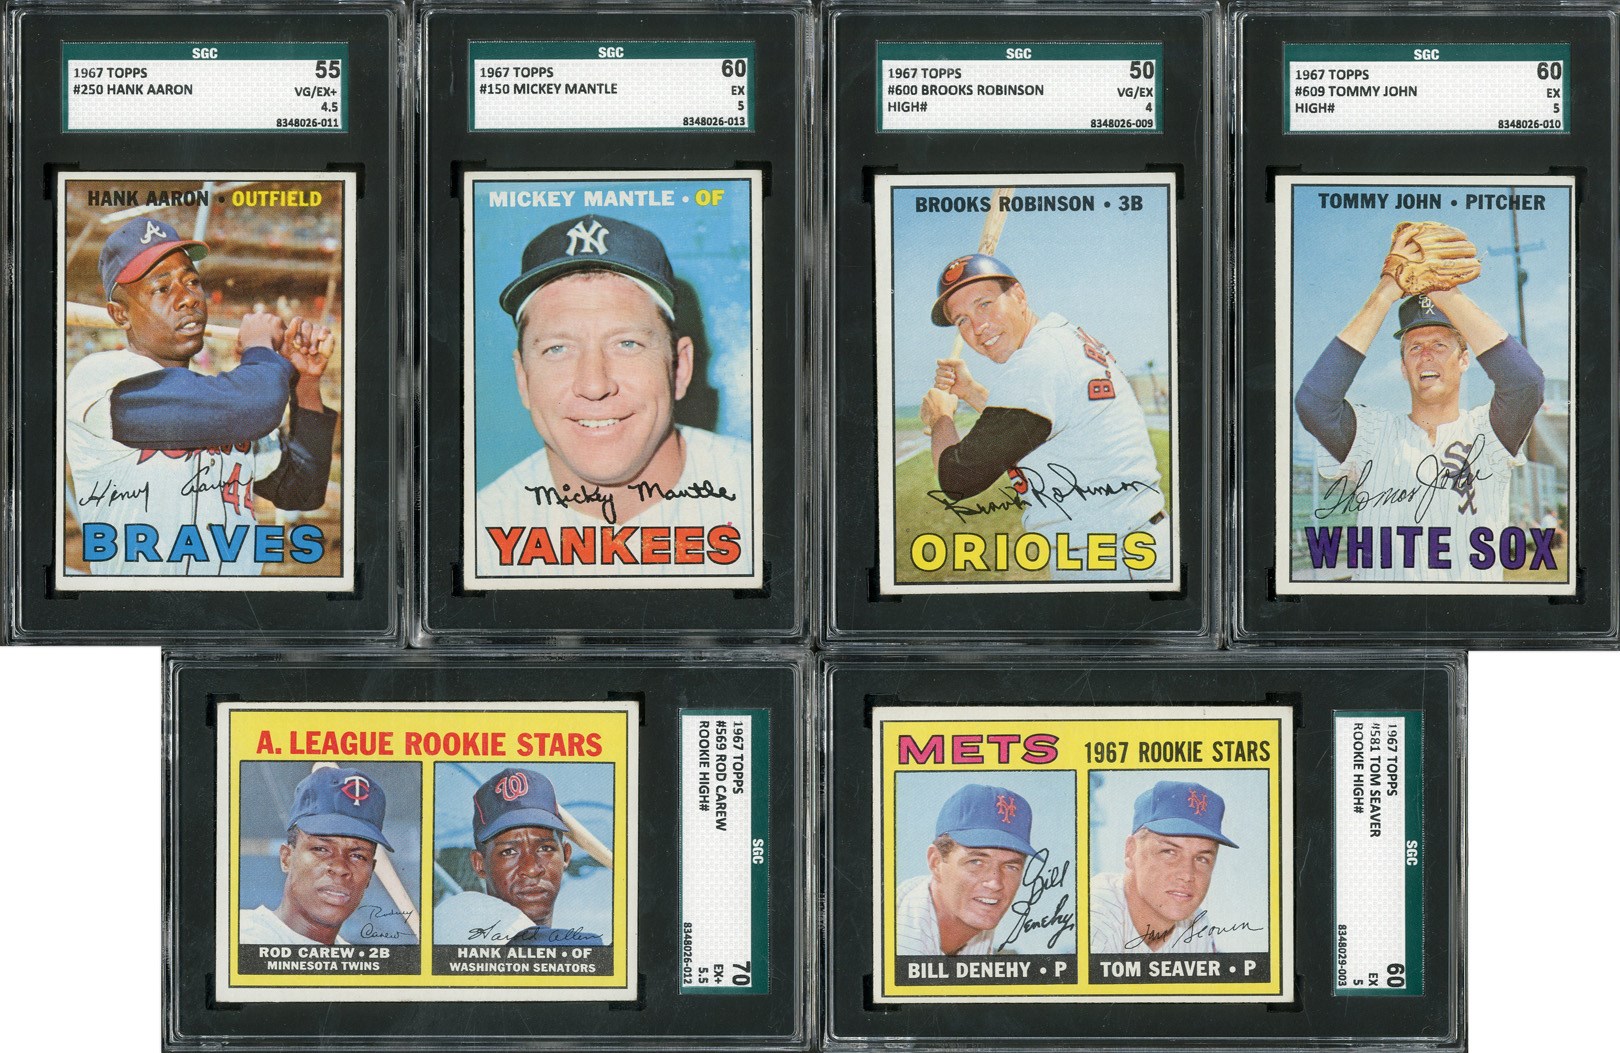 - 1967 Topps Complete Set of 609 Cards (6 SGC Graded)